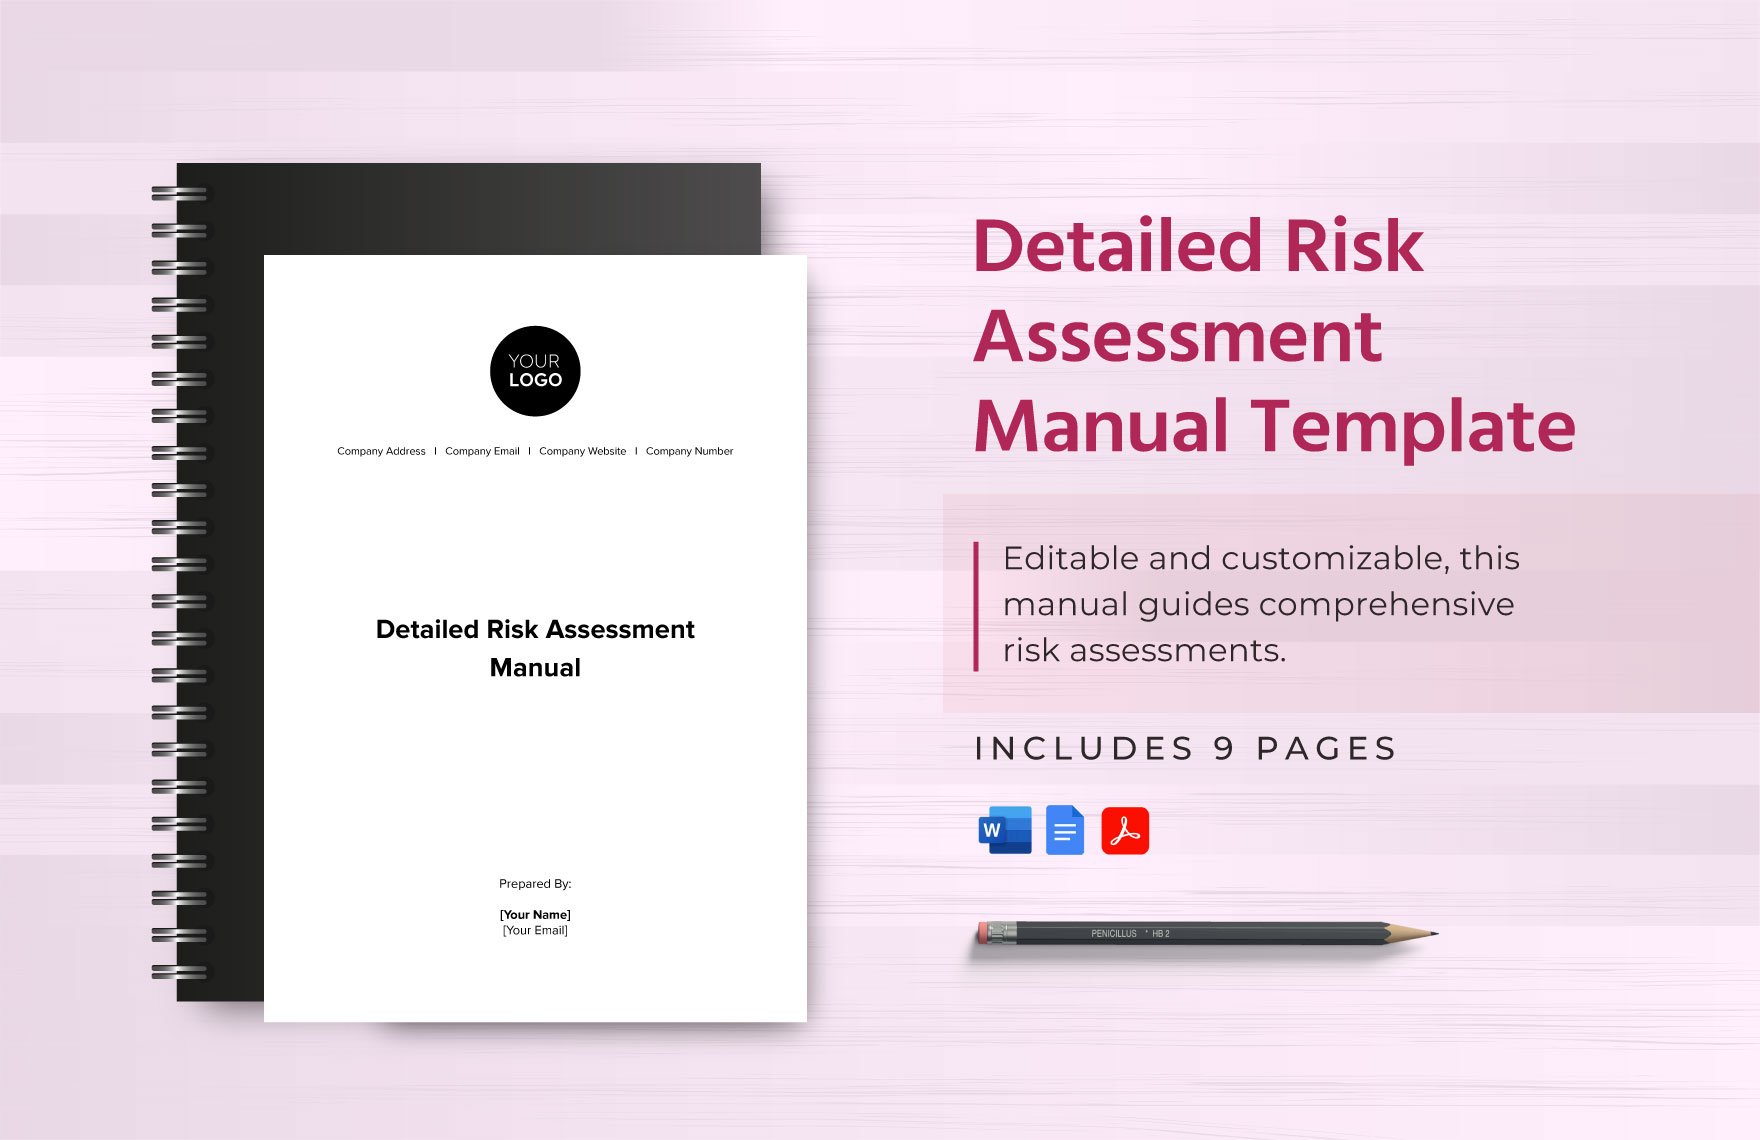 Detailed Risk Assessment Manual Template in Word, Google Docs, PDF